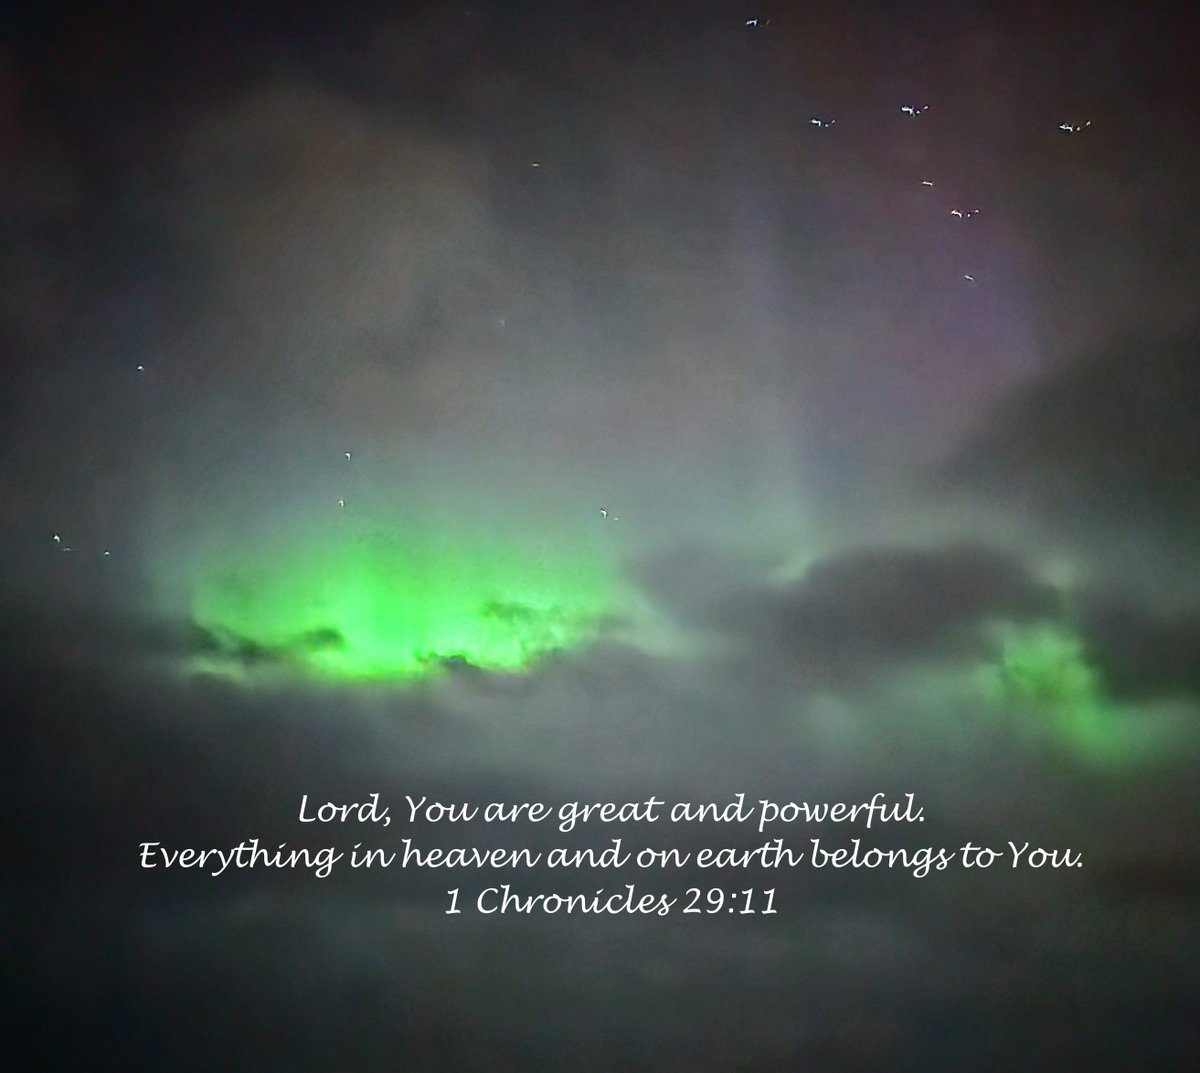 Lord, You are great and powerful. Everything in heaven and on earth belongs to You. 1 Chronicles 29:11